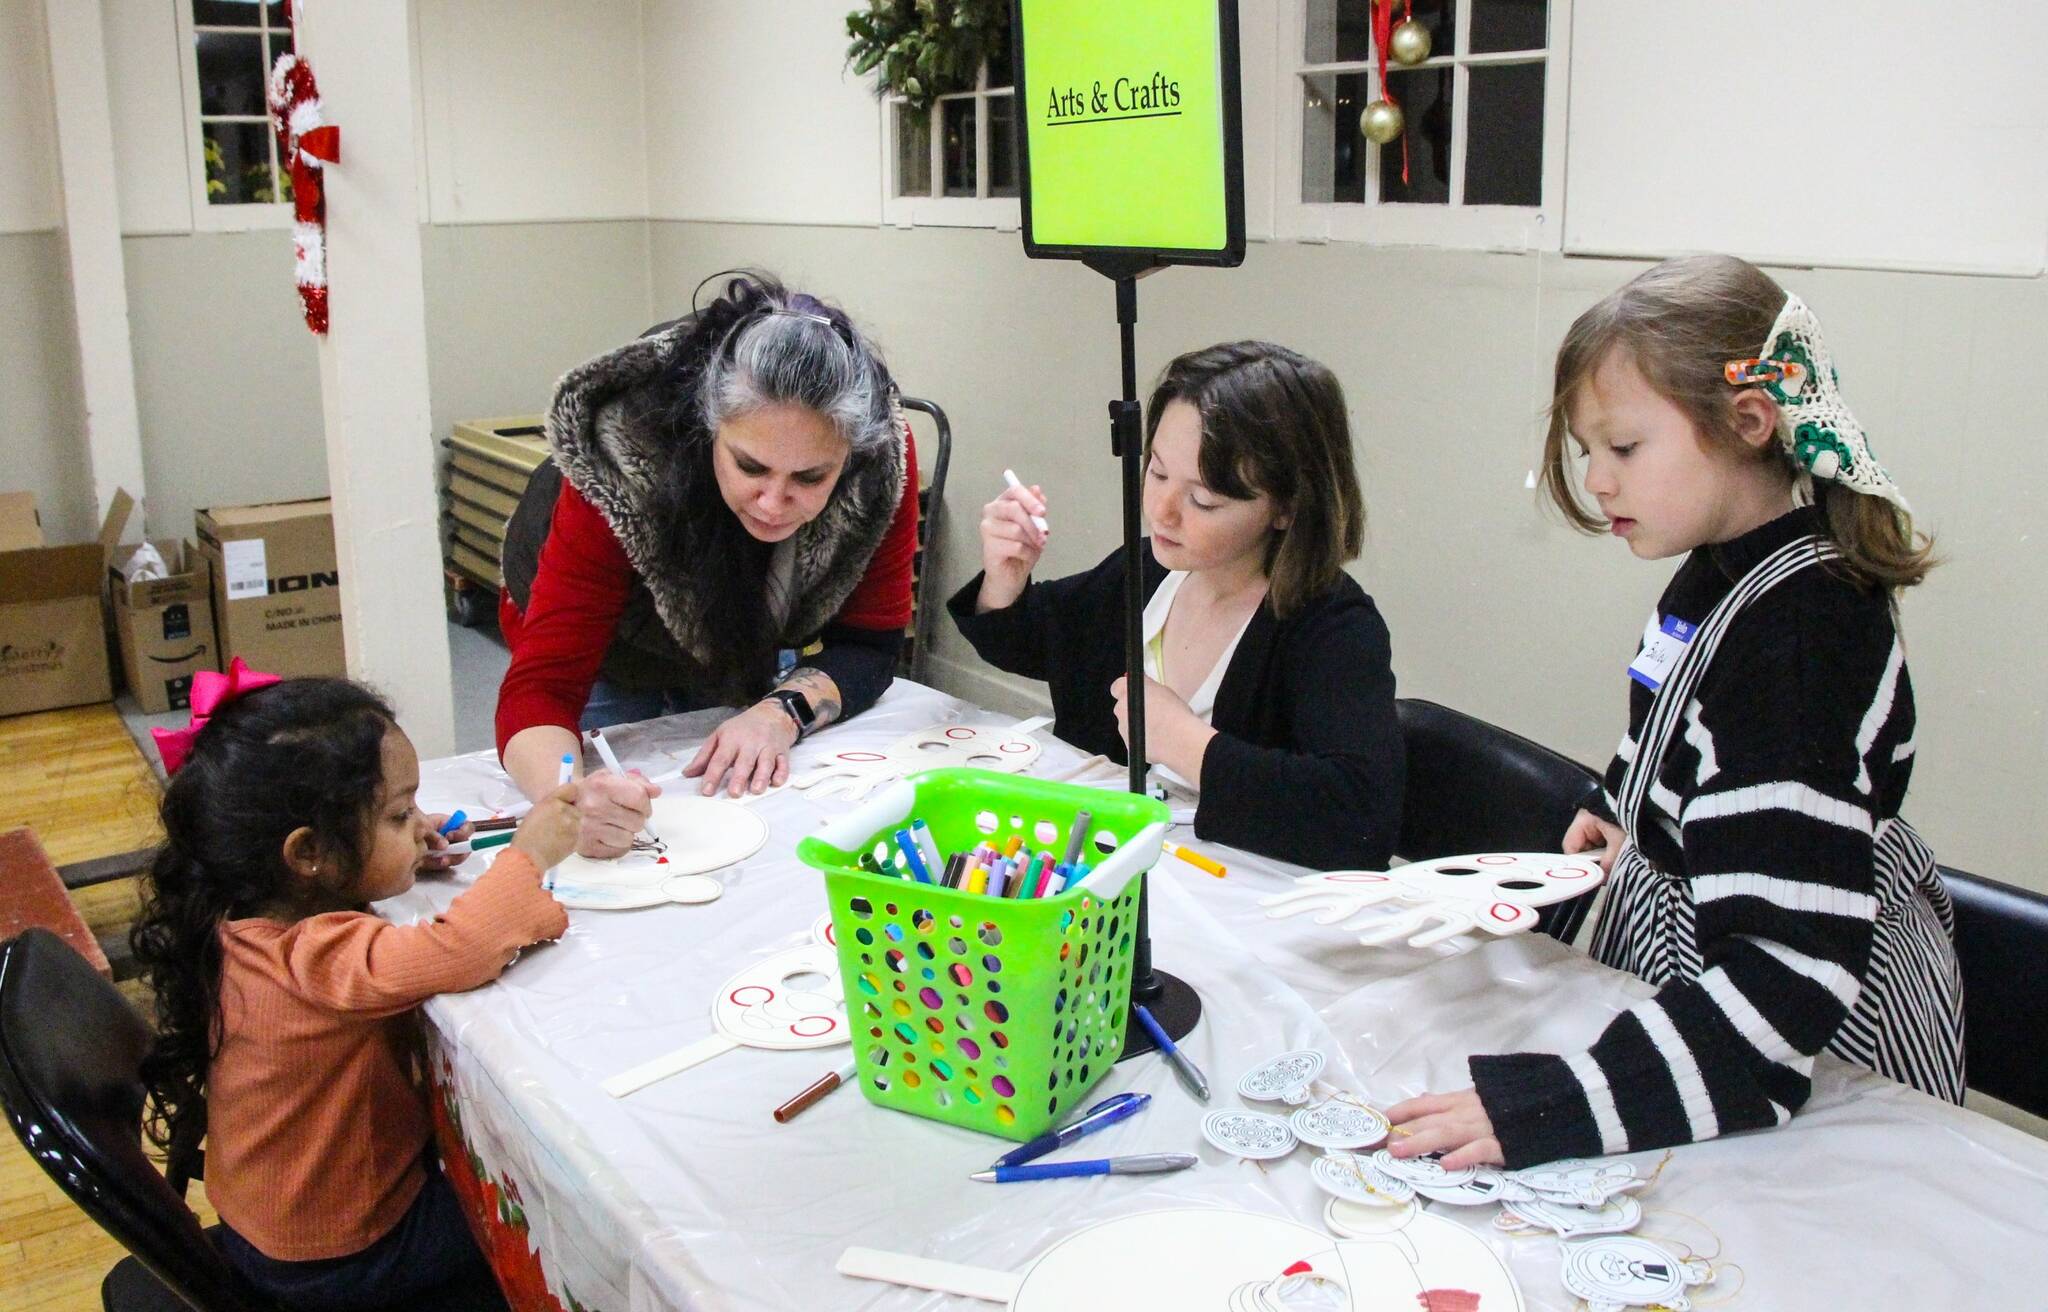 While they waited for Santa to arrive, families had fun honing their crafting skills. (Photo by Luisa Loi)